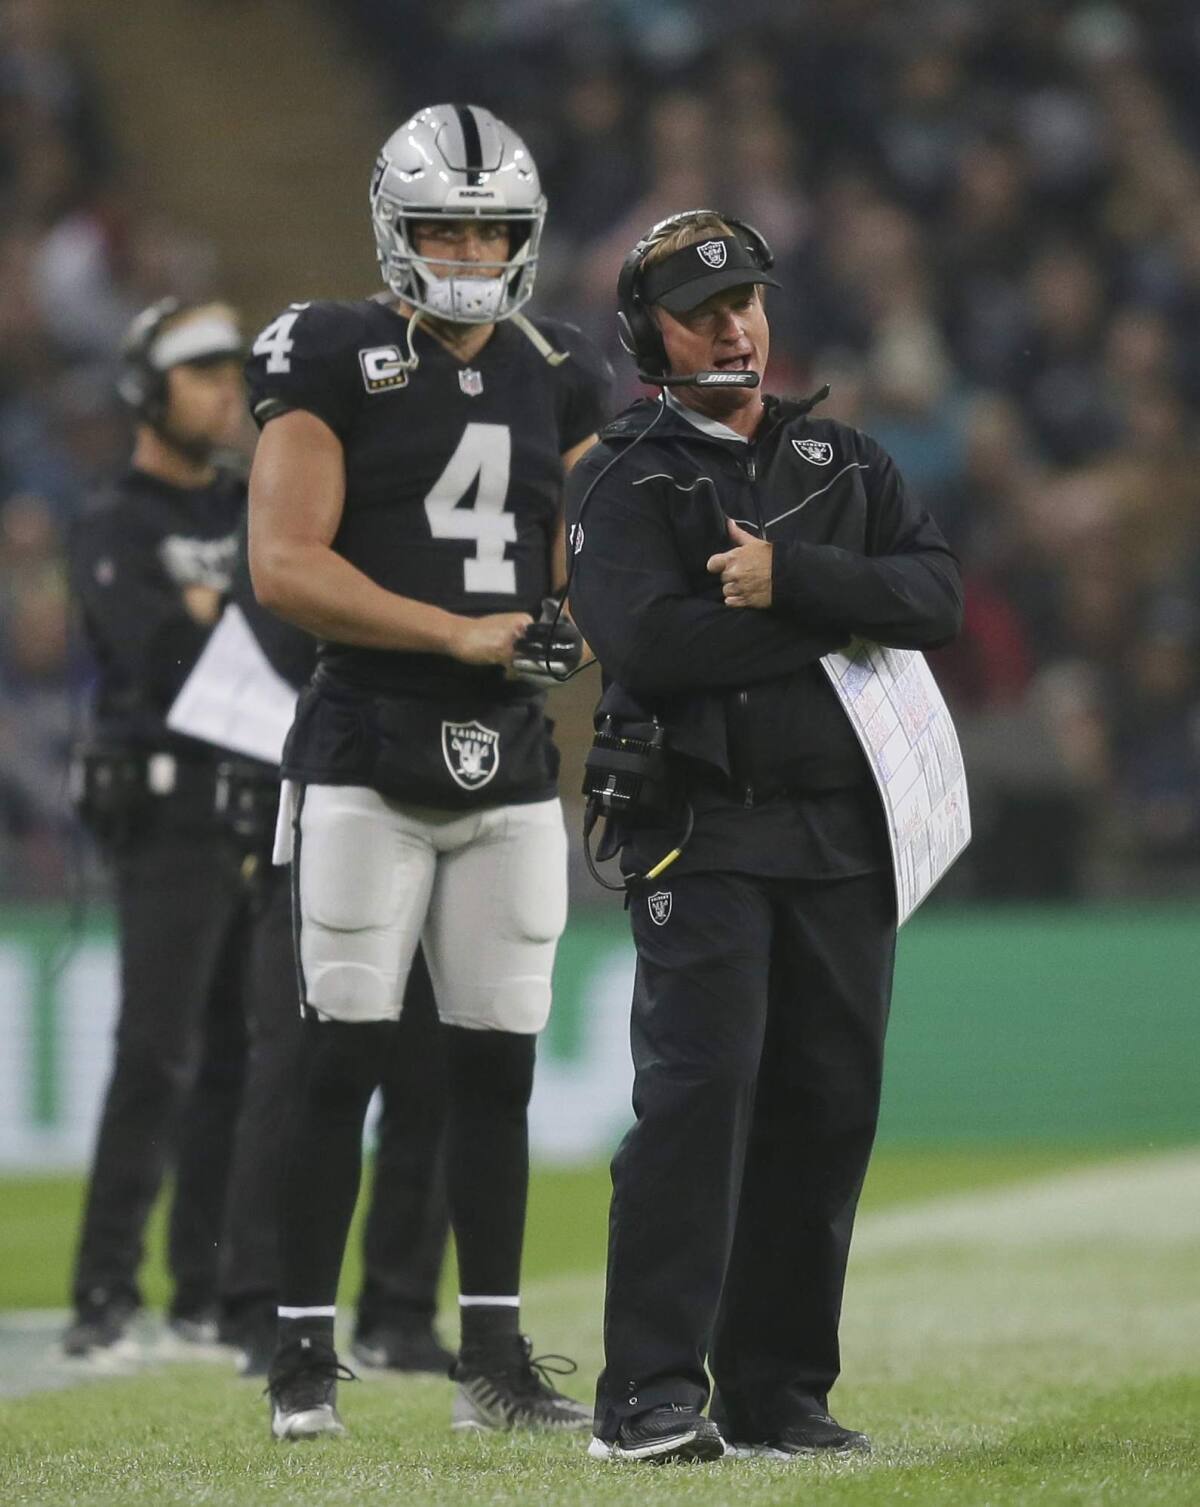 In first game after Jon Gruden's resignation, focused Raiders blow